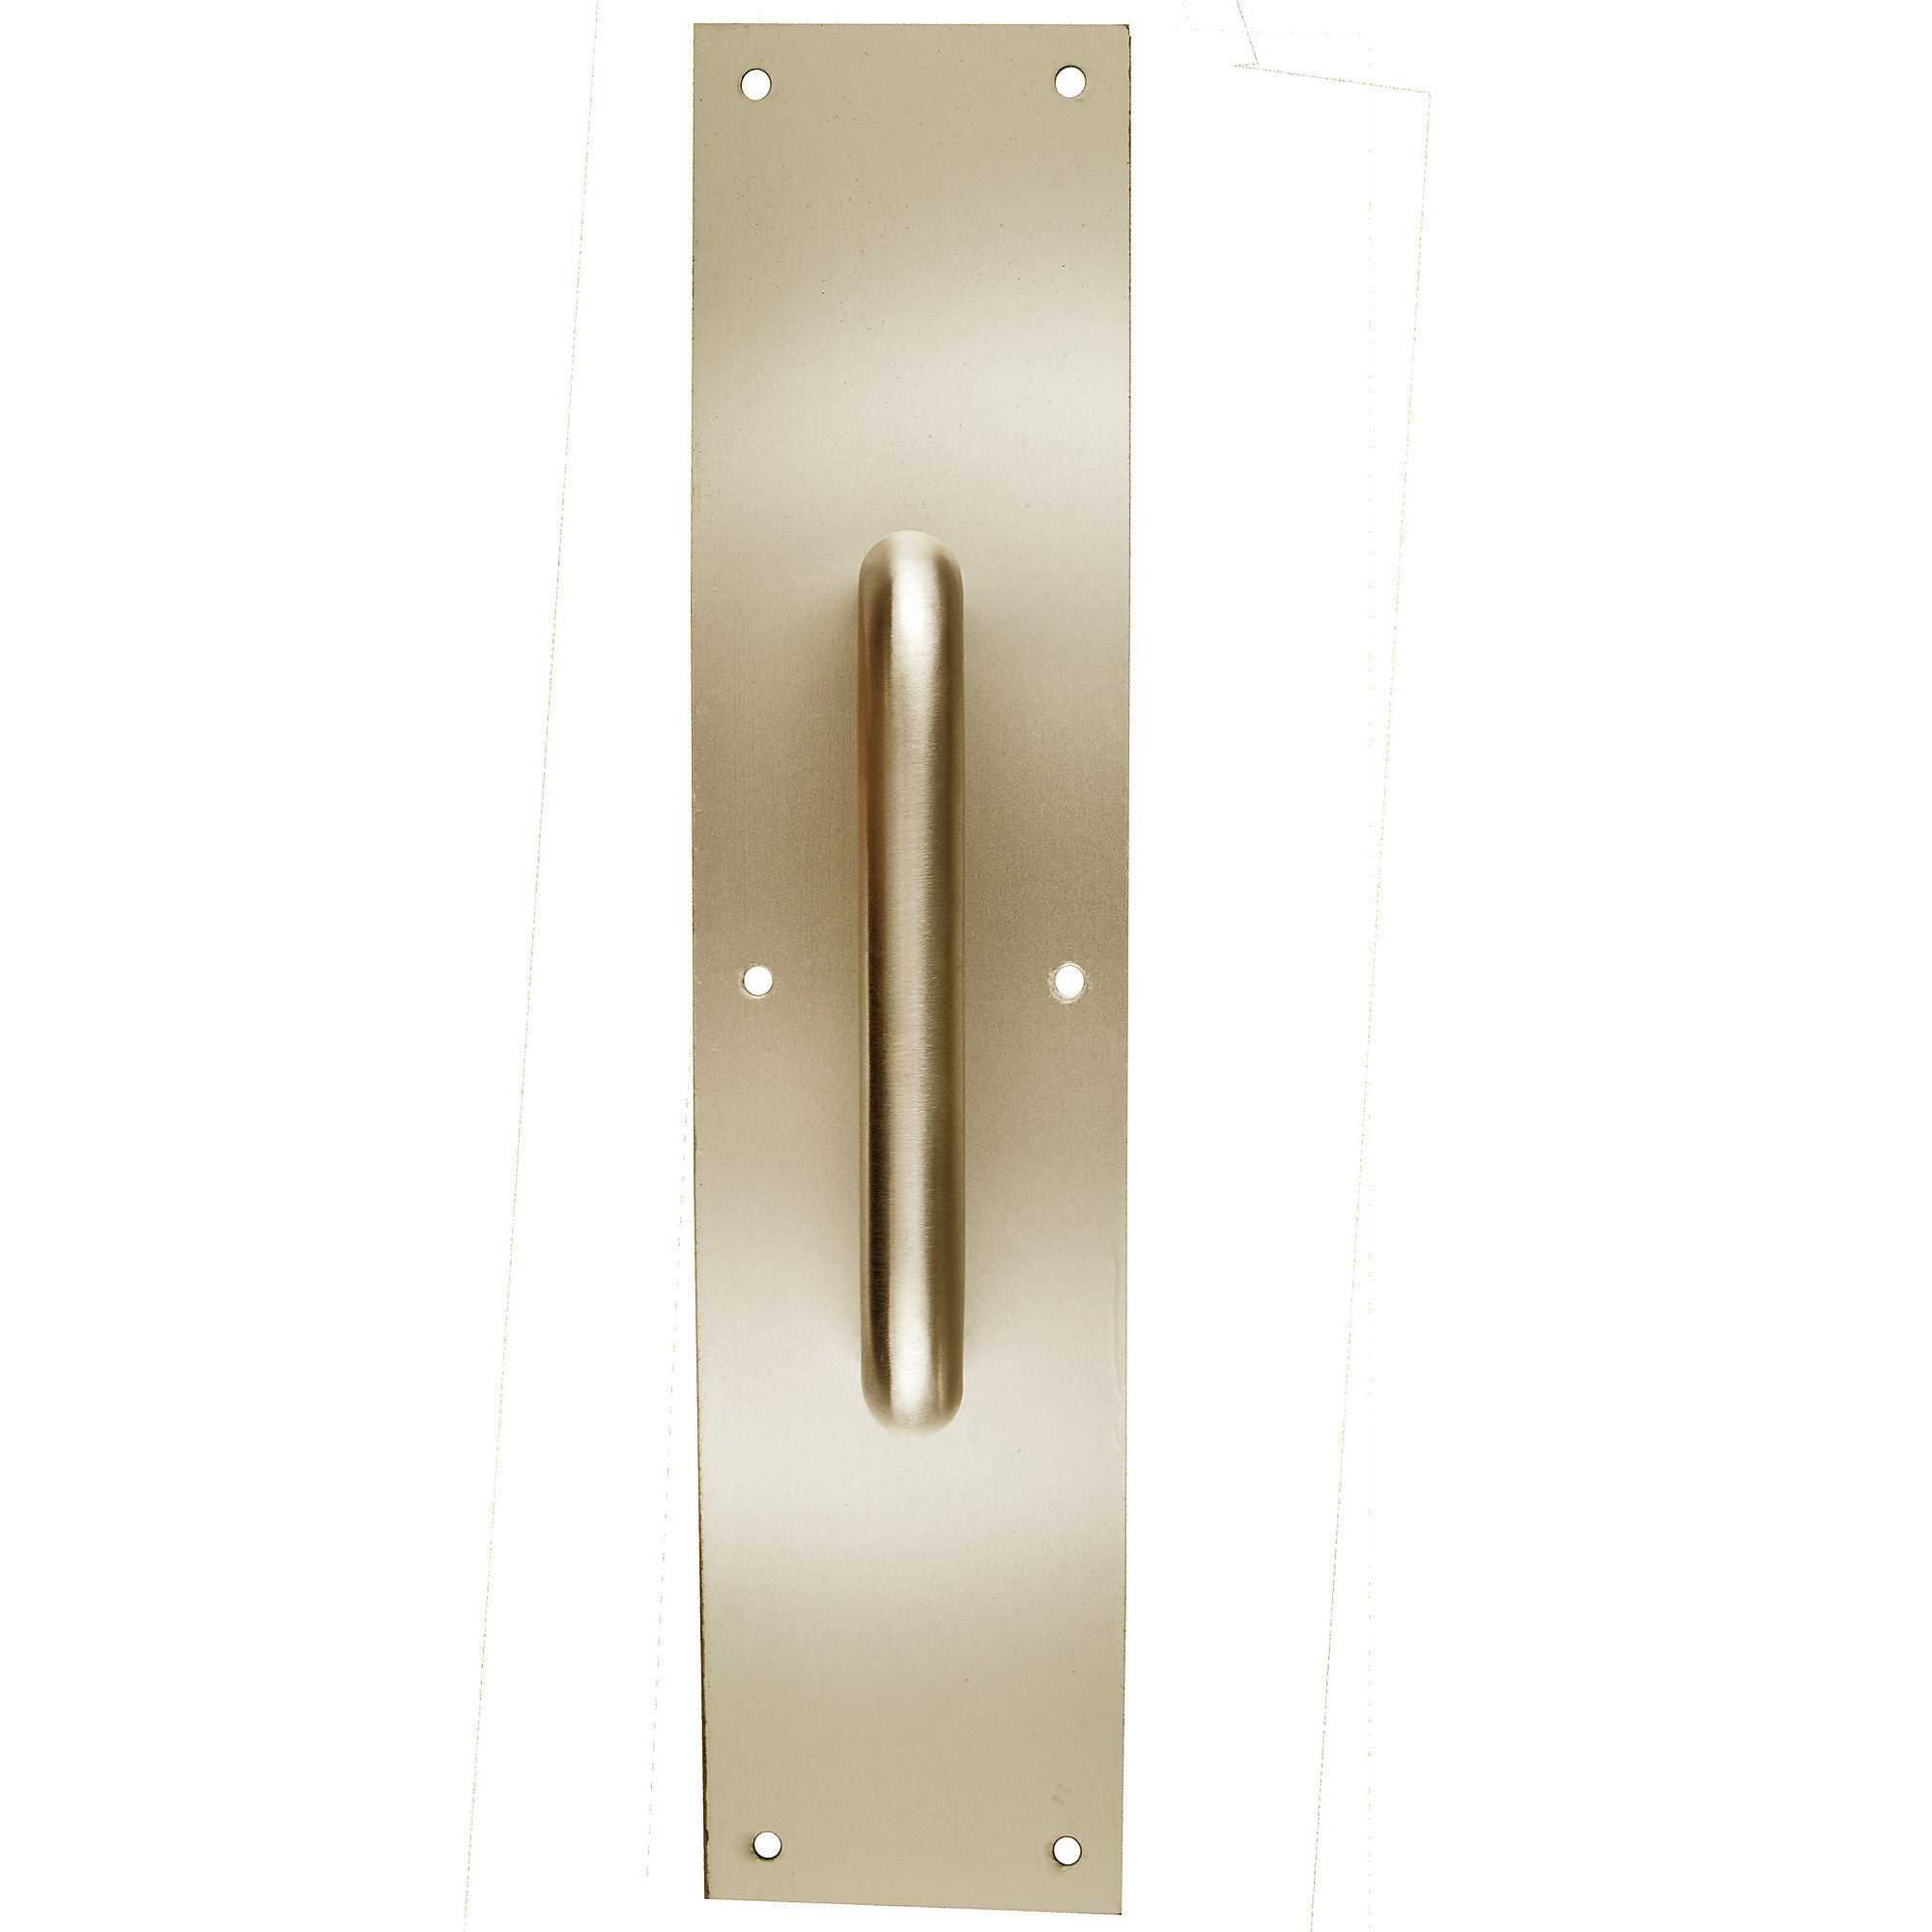 Trans Atlantic, 4Inch x 16Inch Bright Brass Pull Plate with Round Pulls, Model GH-PP5425-US3